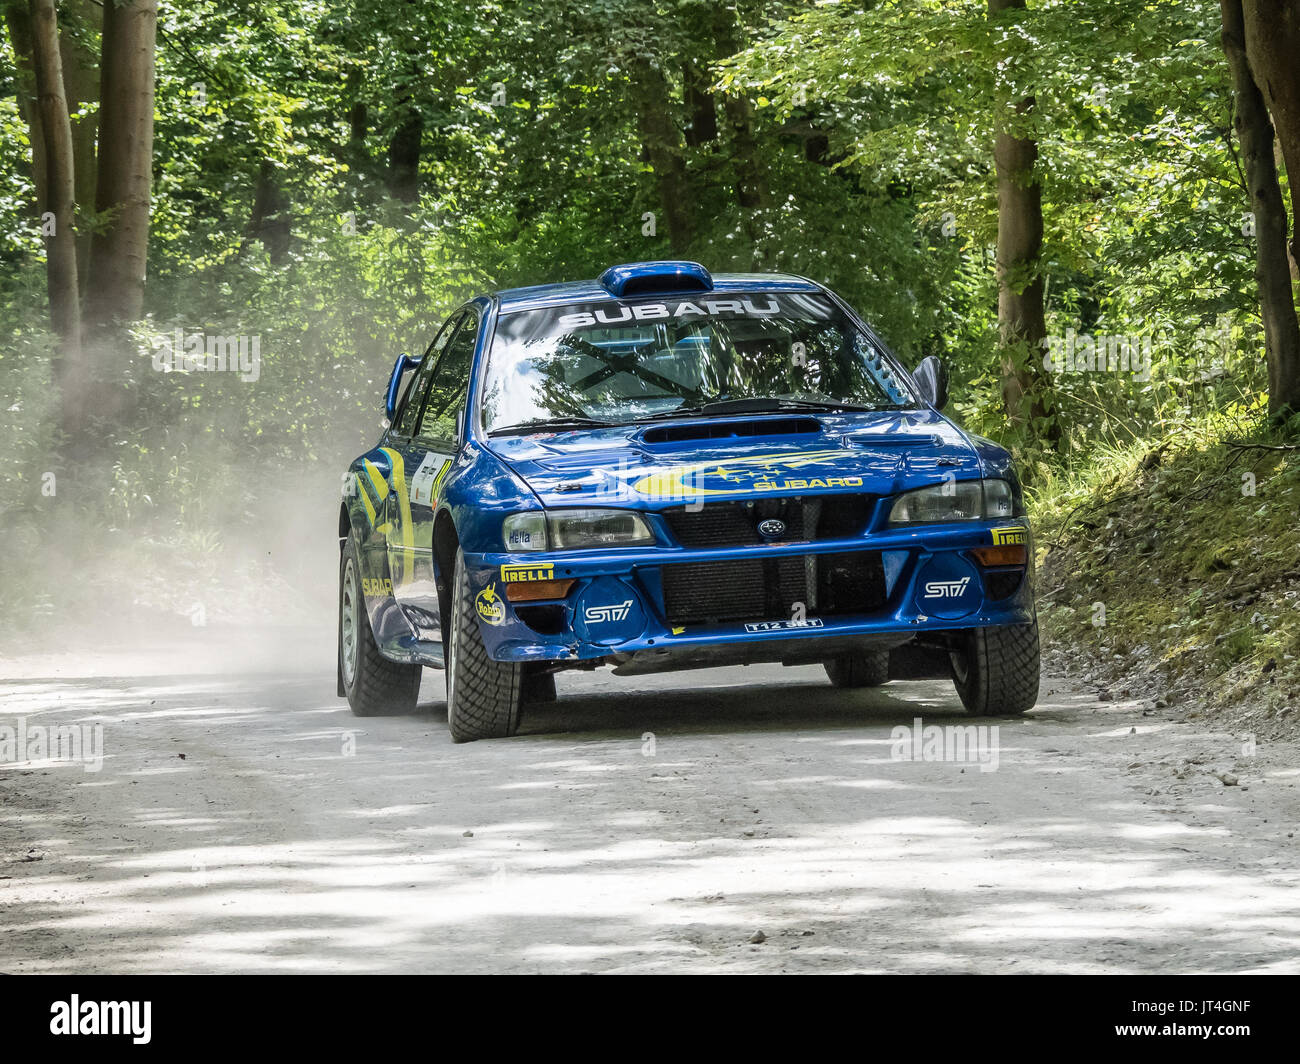 Subaru Impreza on the forest rally stage at Goodwood festival of speed 2017 Stock Photo